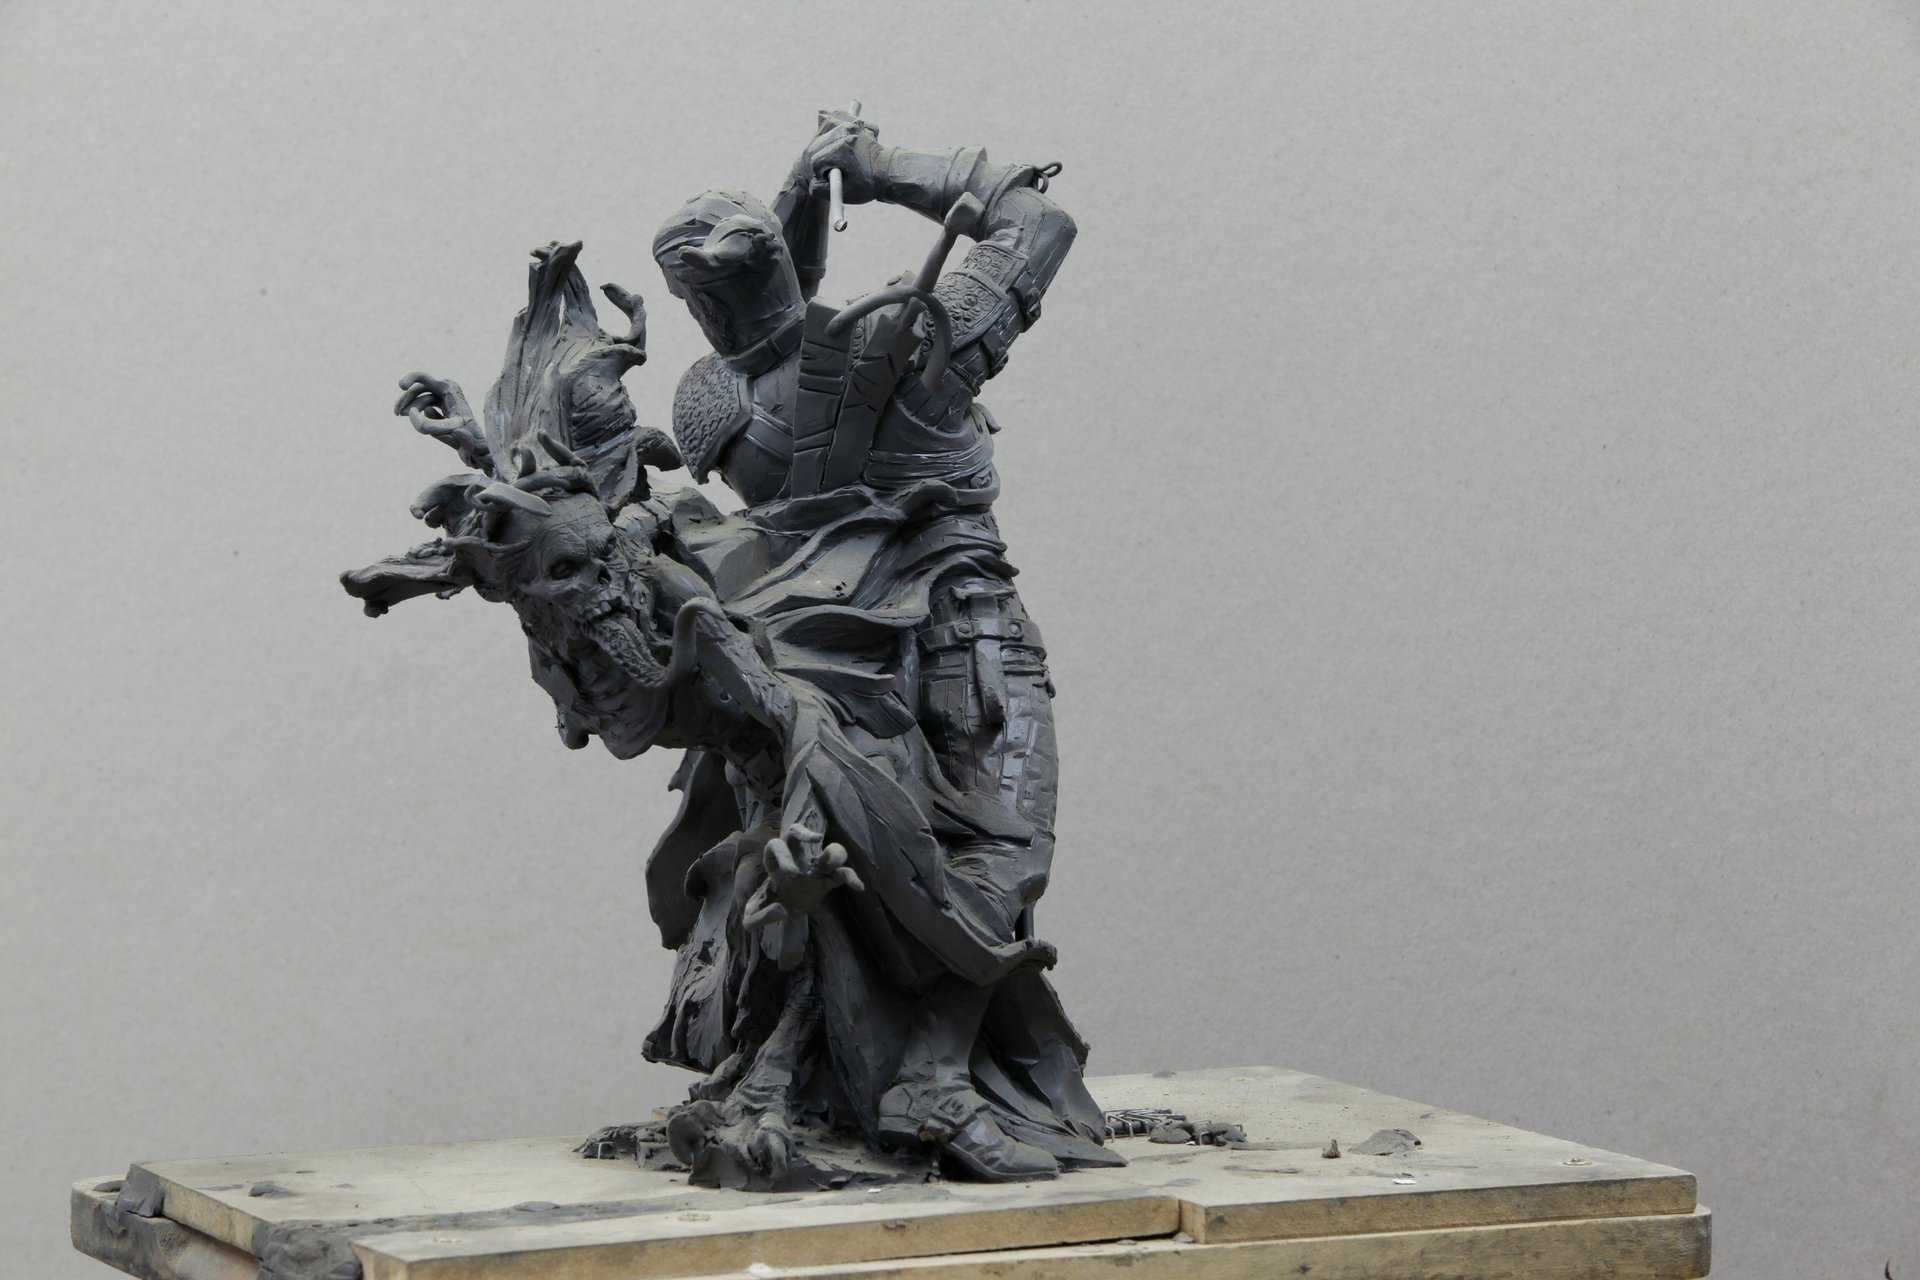 Giant Witcher 3 Sculpture Is As Handsome As Geralt